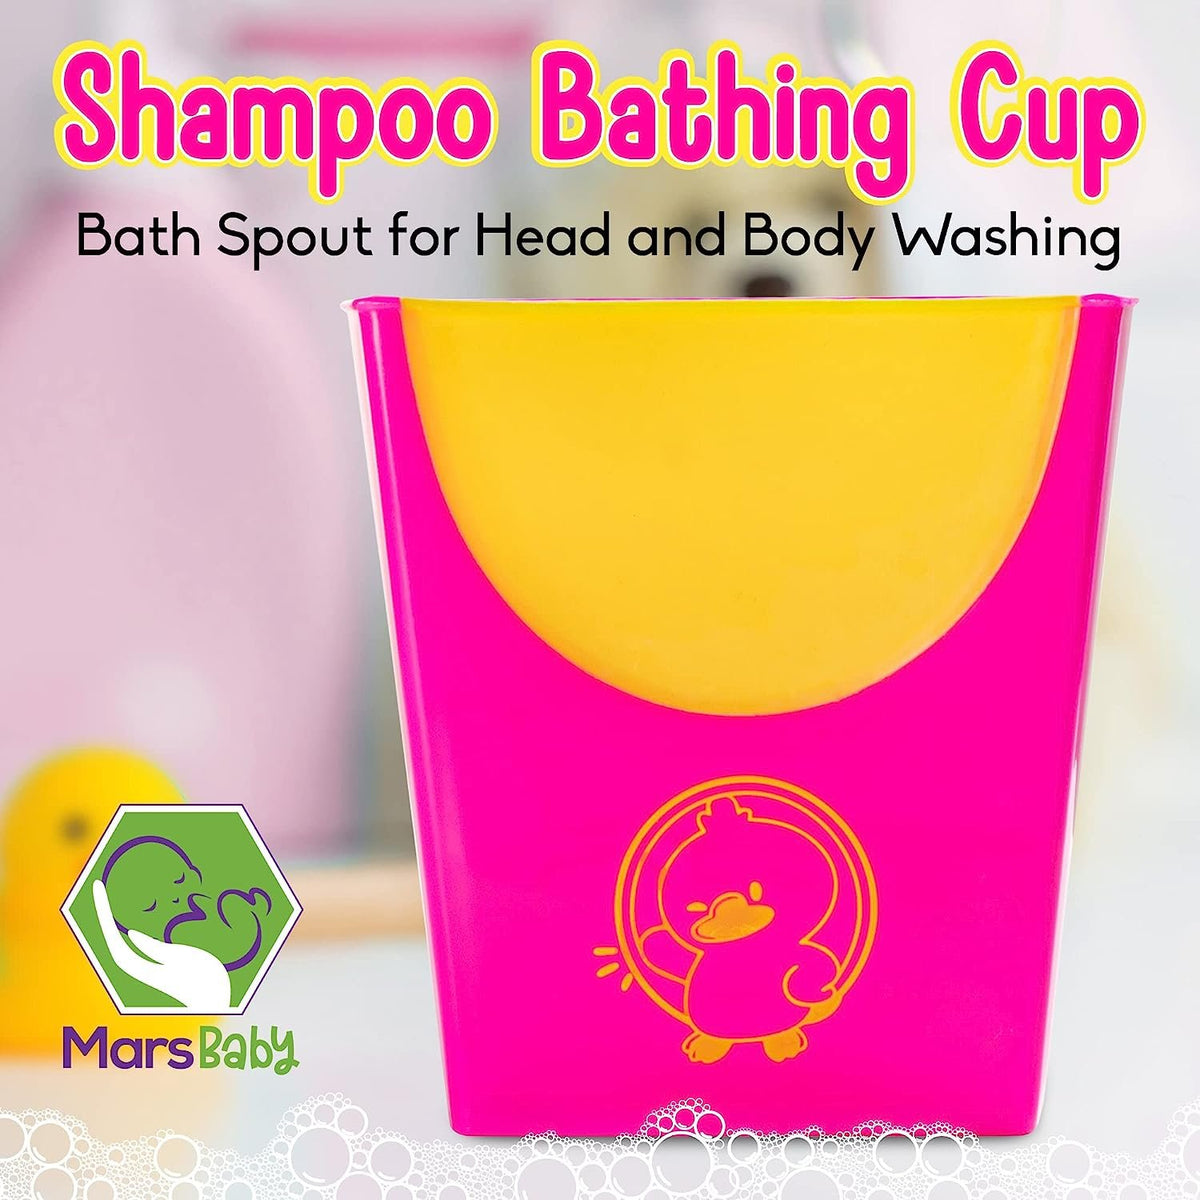 MARS BABY Shampoo Bathing Cup - Bath Spout for Head and Body Washing - Rinse Newborns and Infants Heads and Protect Eyes - No More Tears